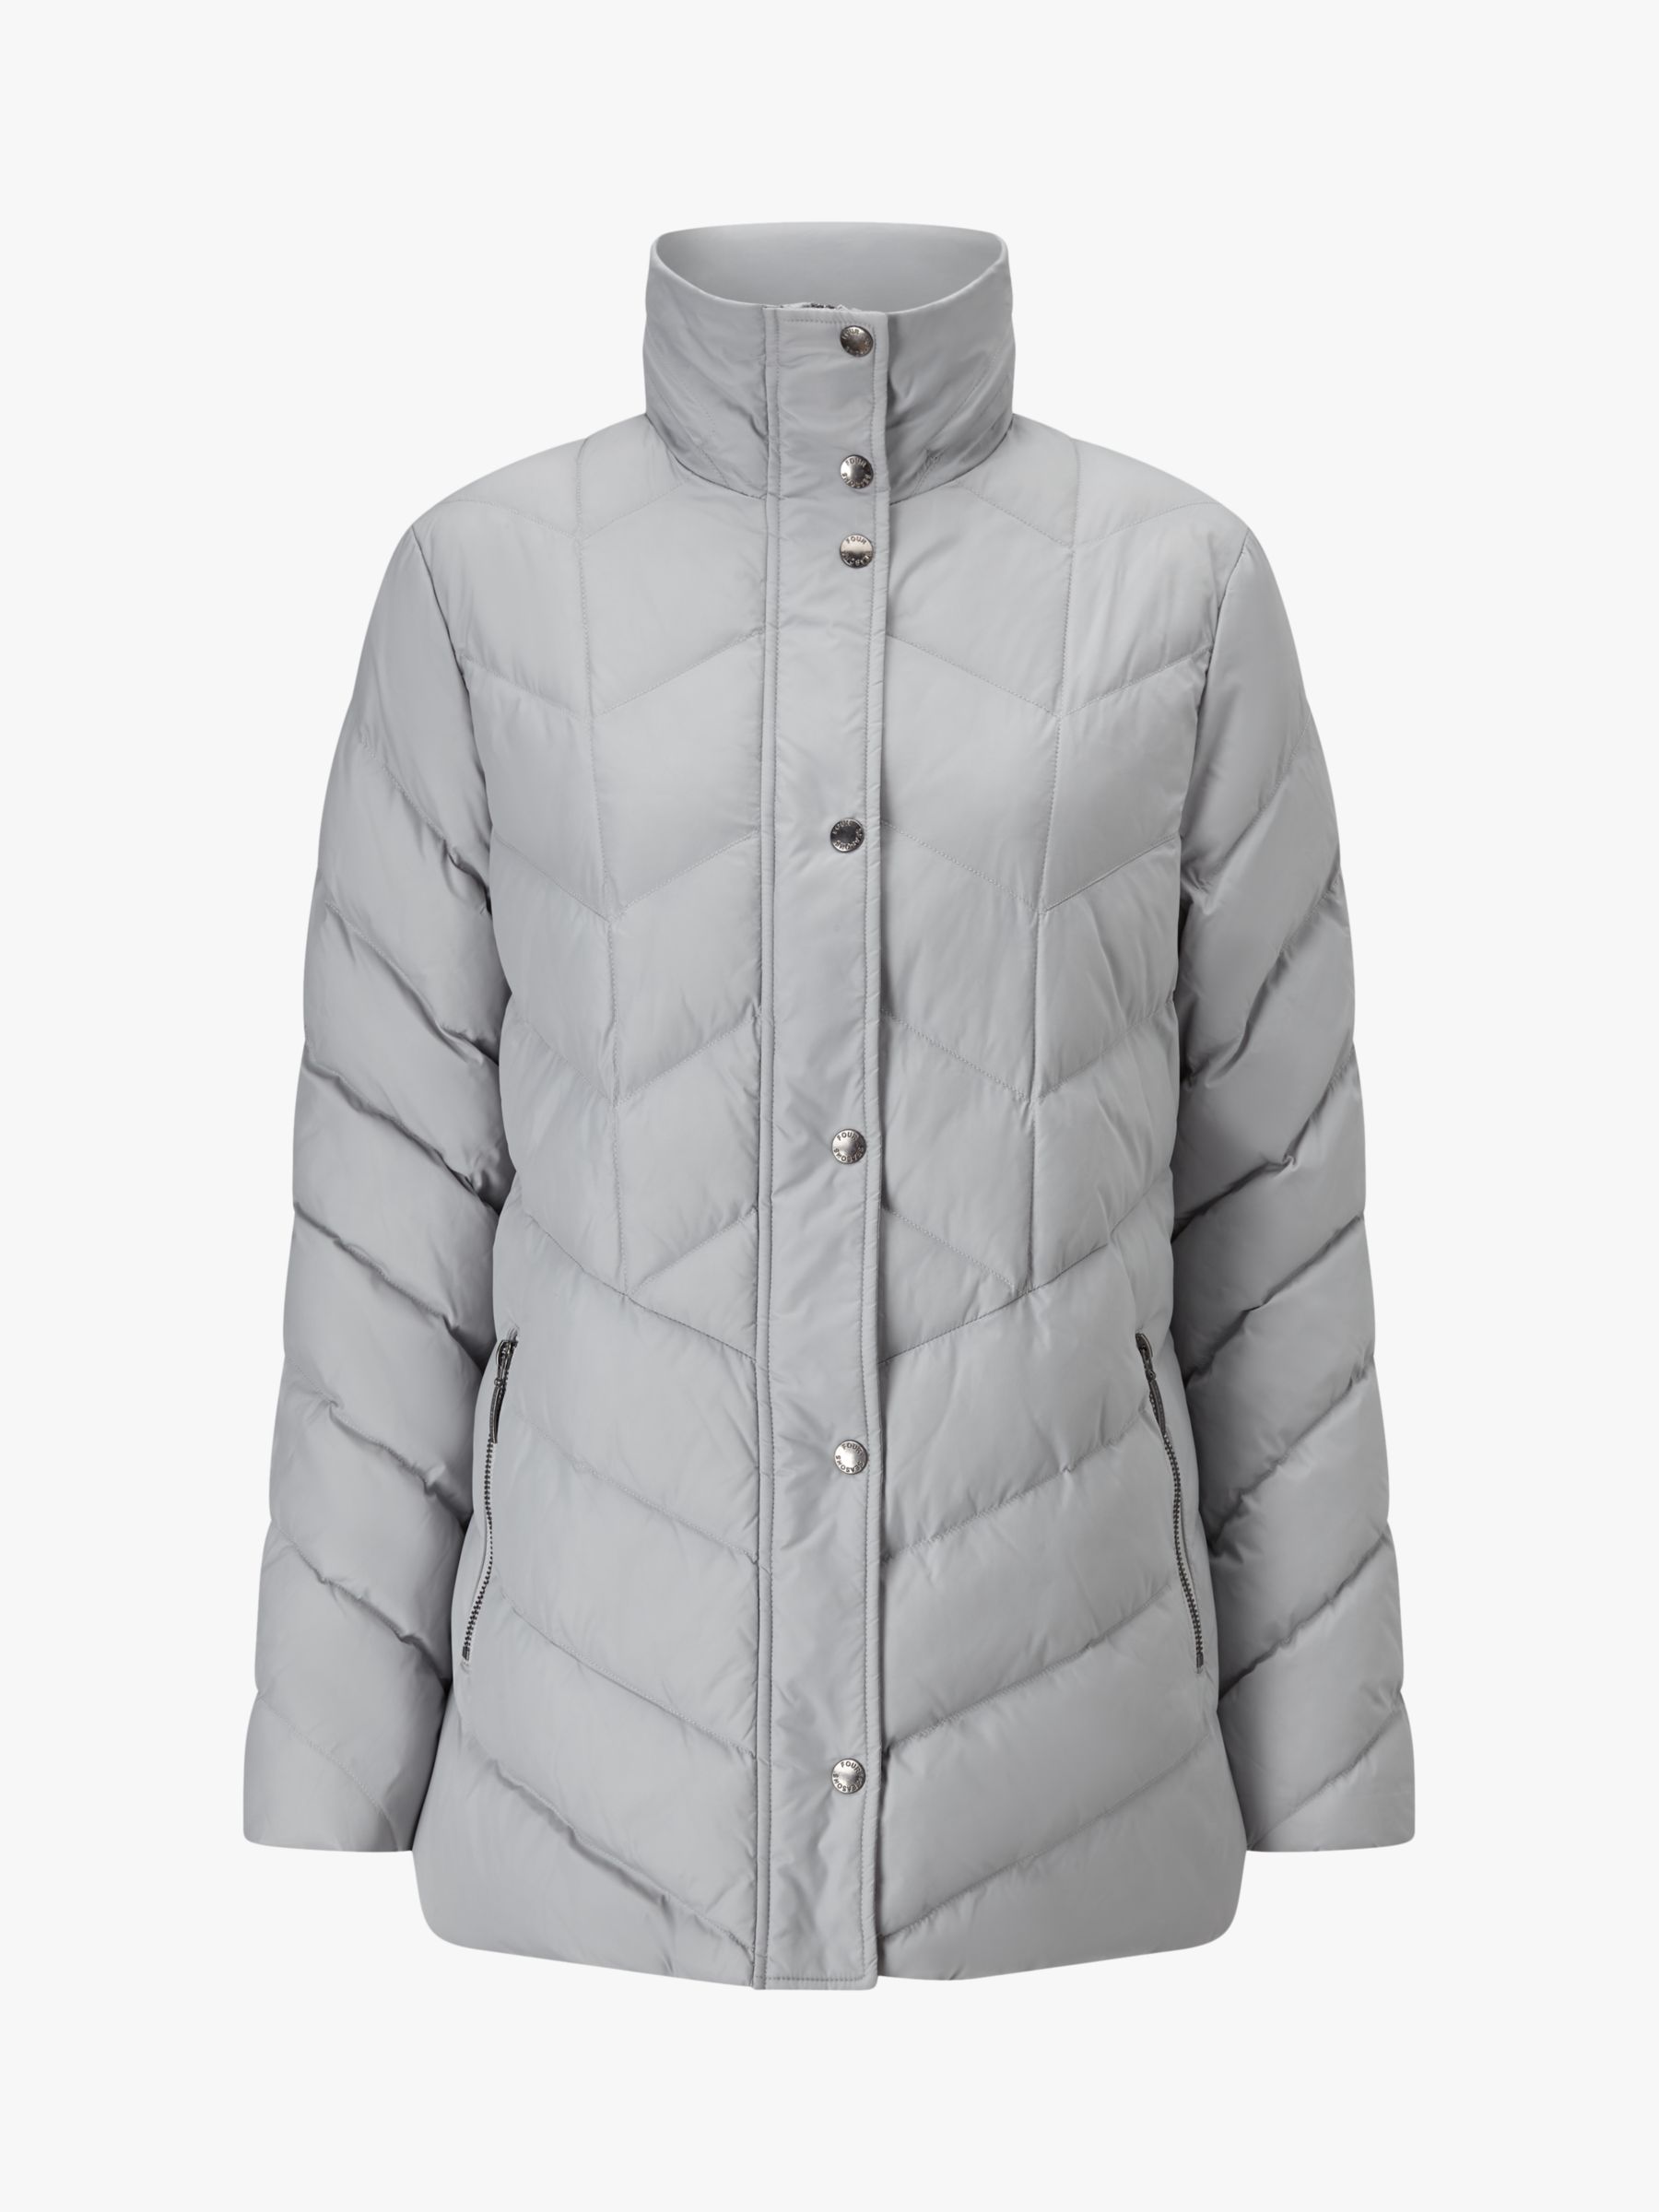 Four Seasons Quilted Jacket, Silver at John Lewis & Partners